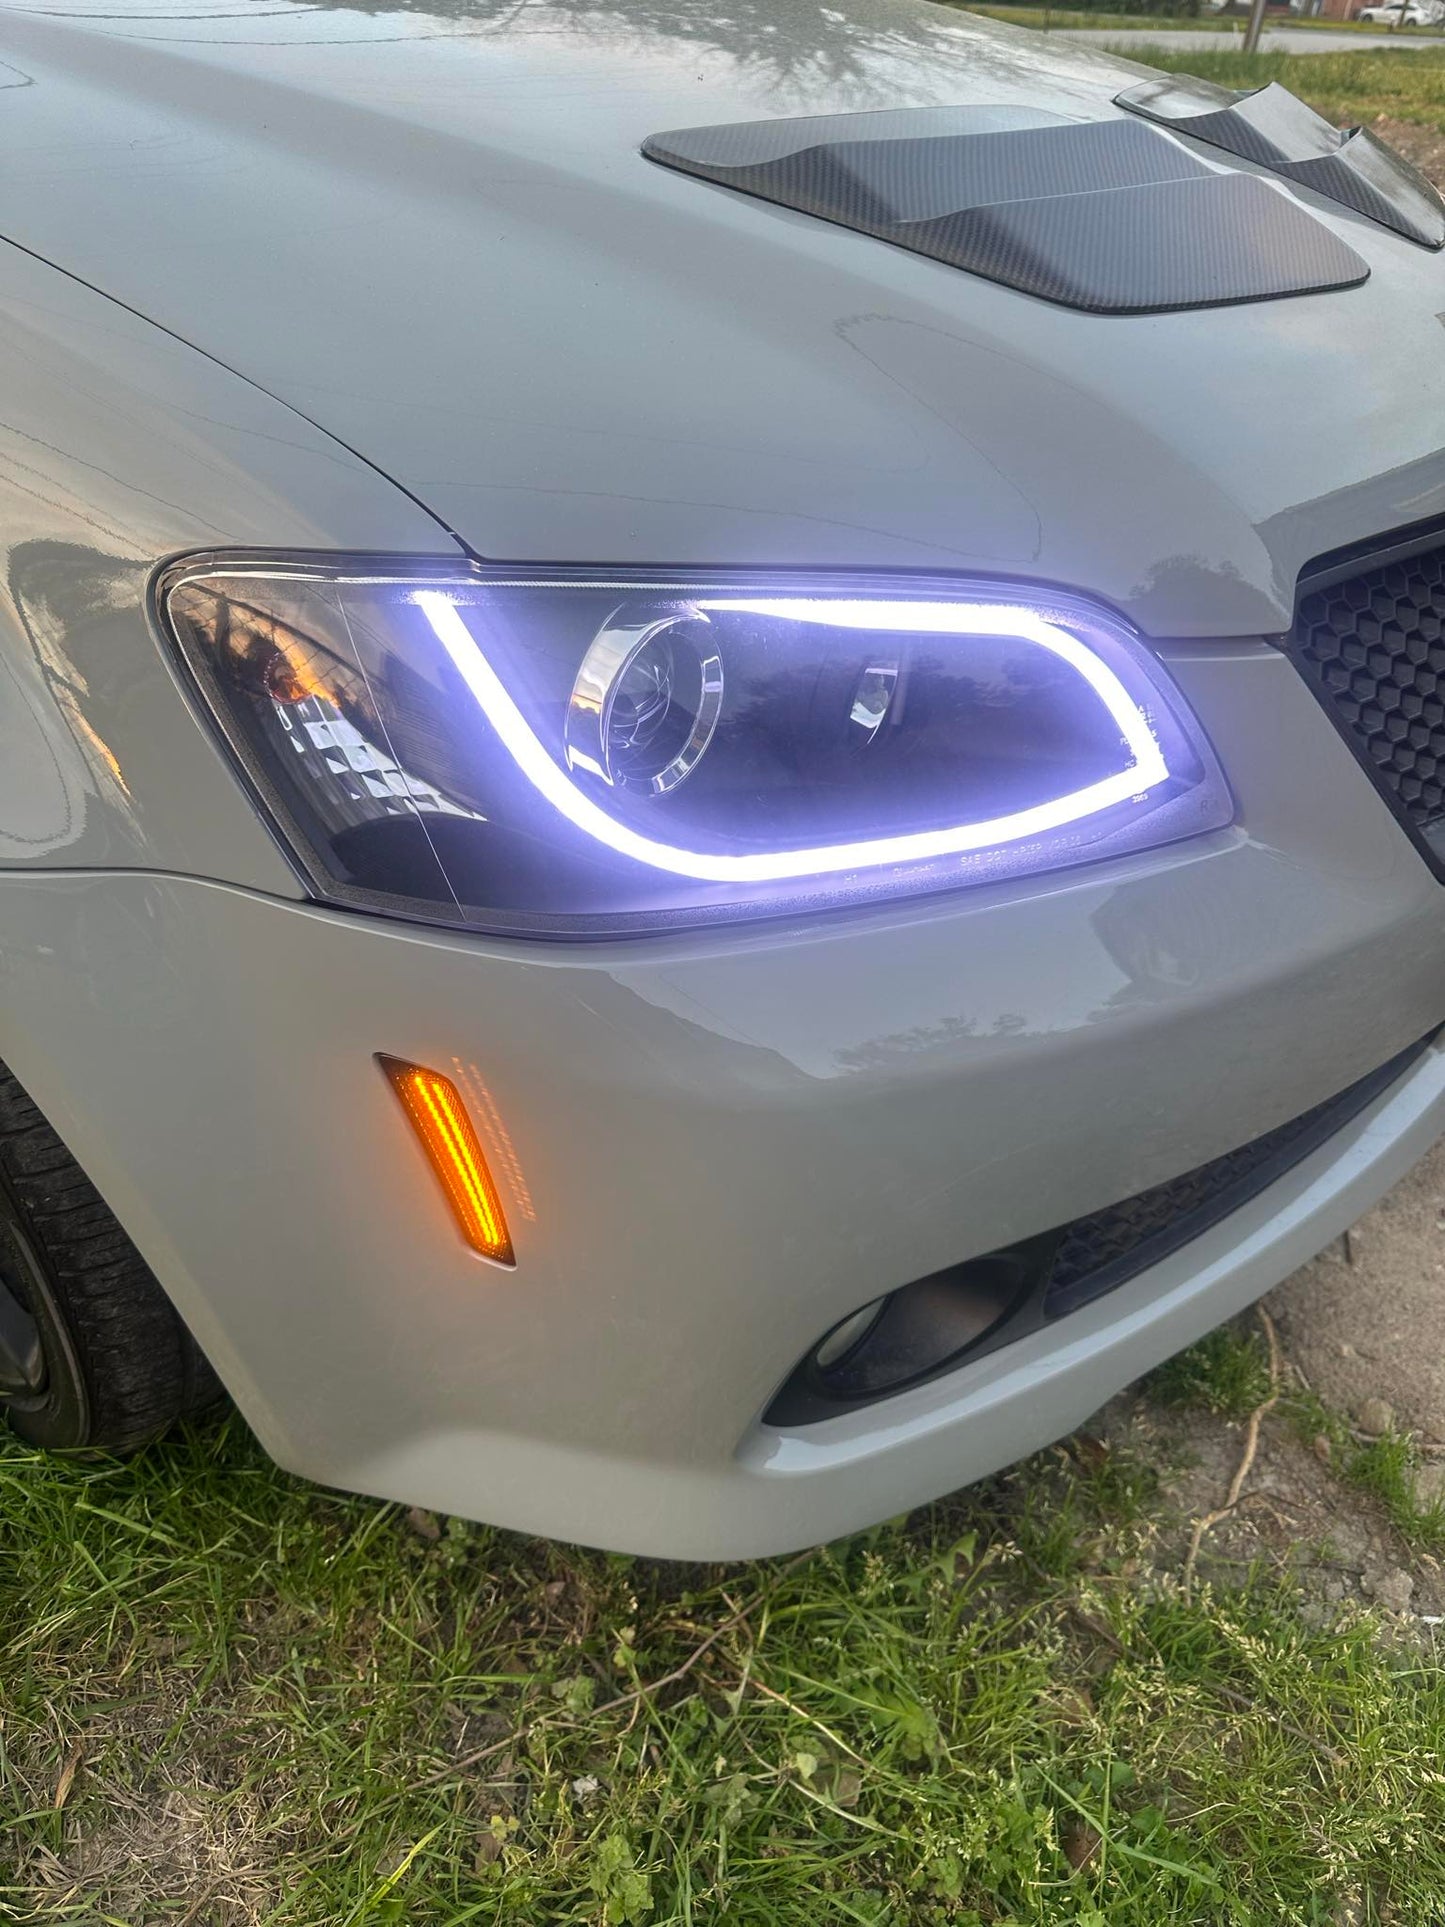 Pontiac G8 and Chevy Caprice LED Parking Lights